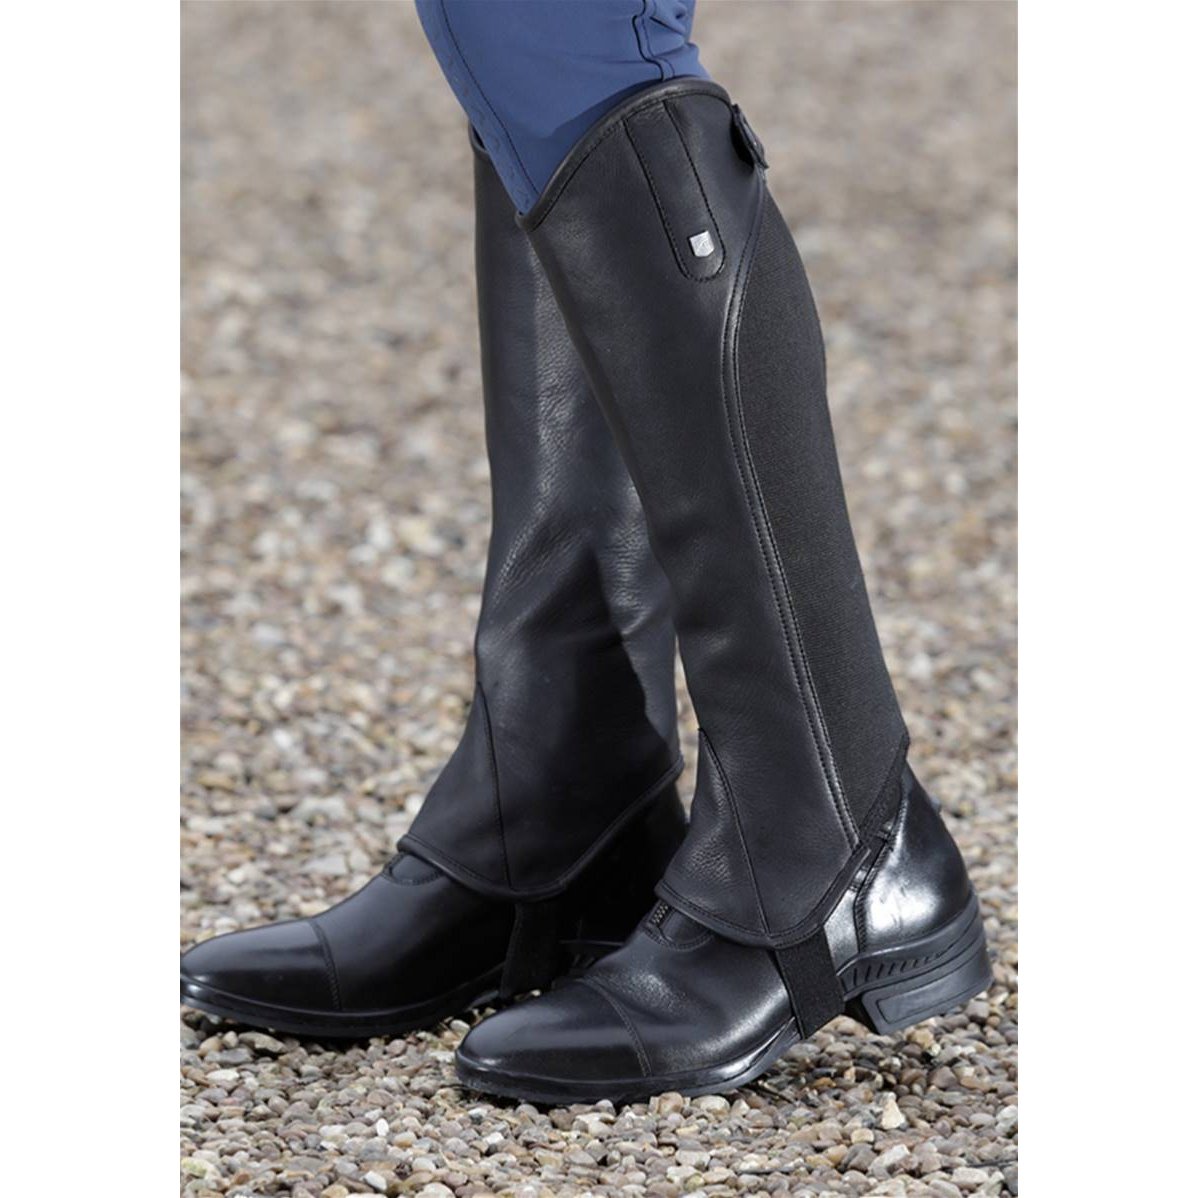 Premier Equine Emrisa Leather Half Chaps-Southern Sport Horses-The Equestrian